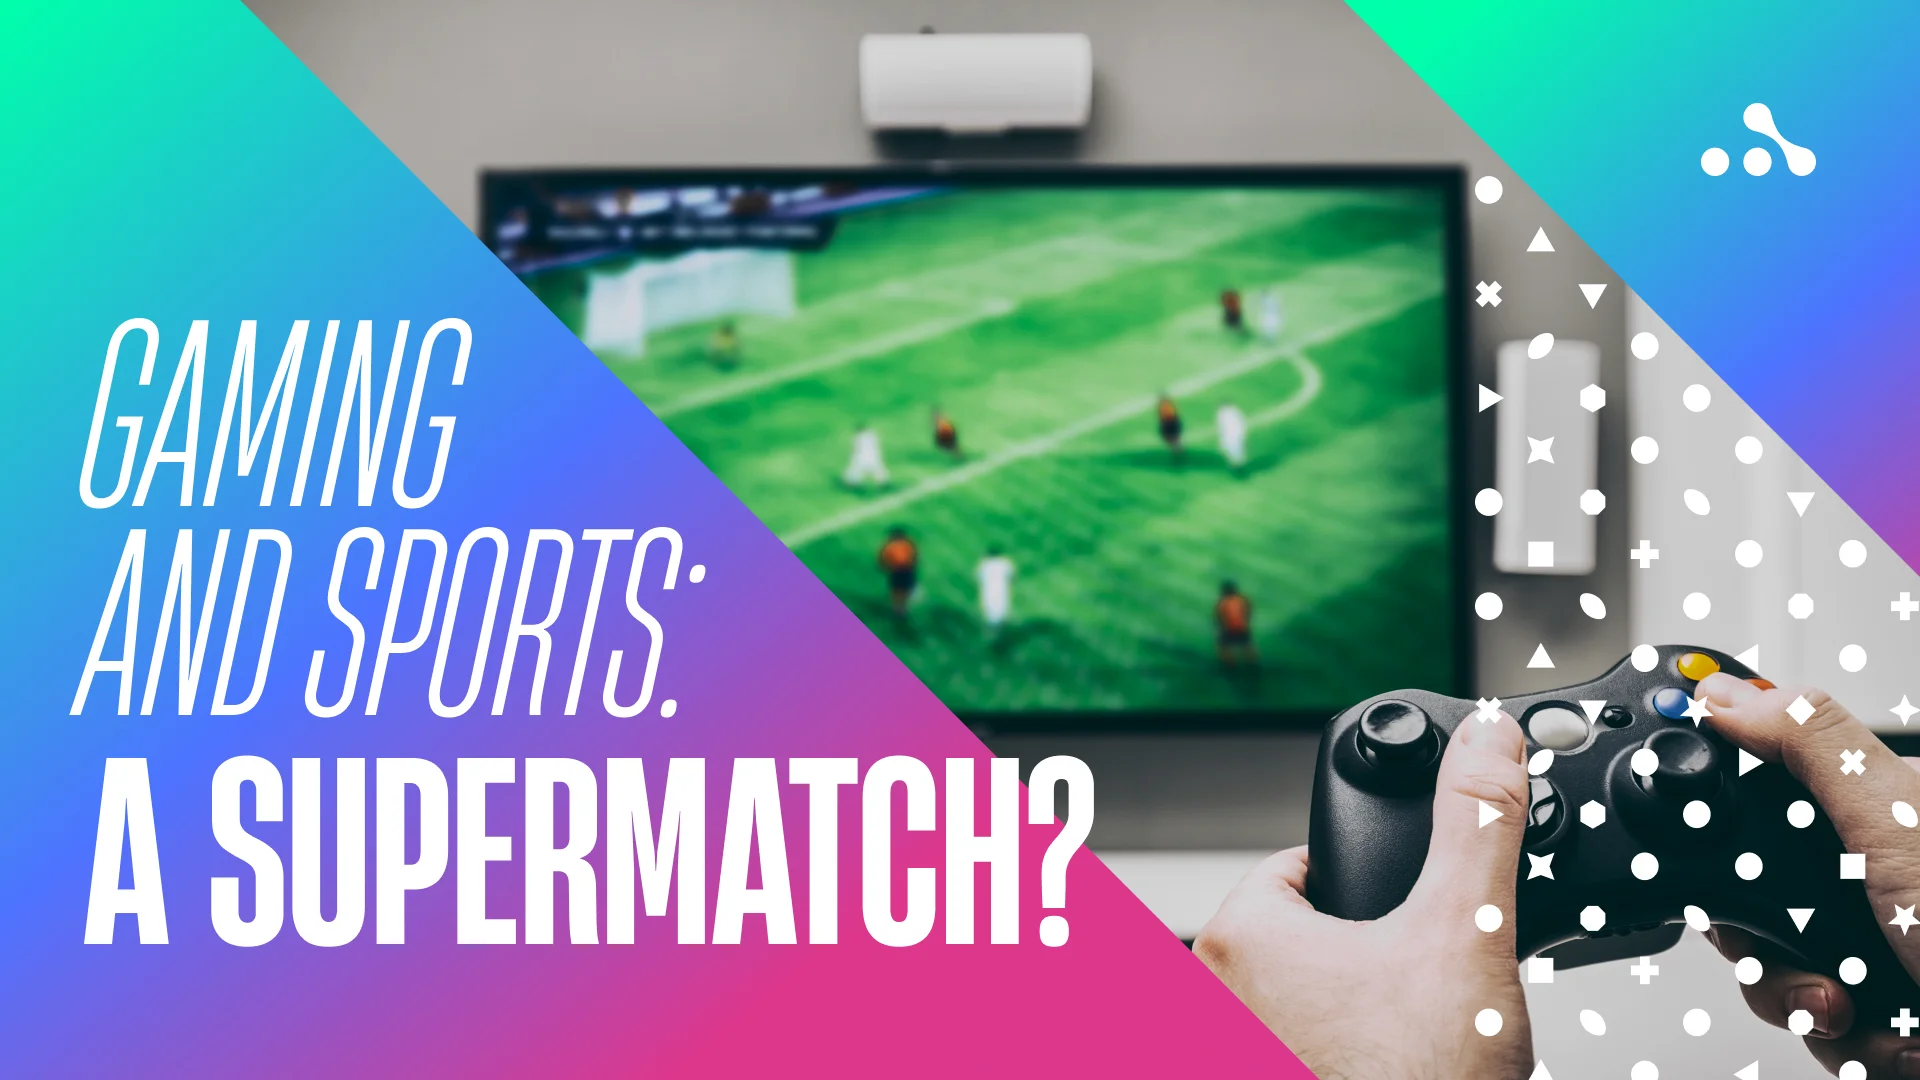 Gaming and sports a supermatch?